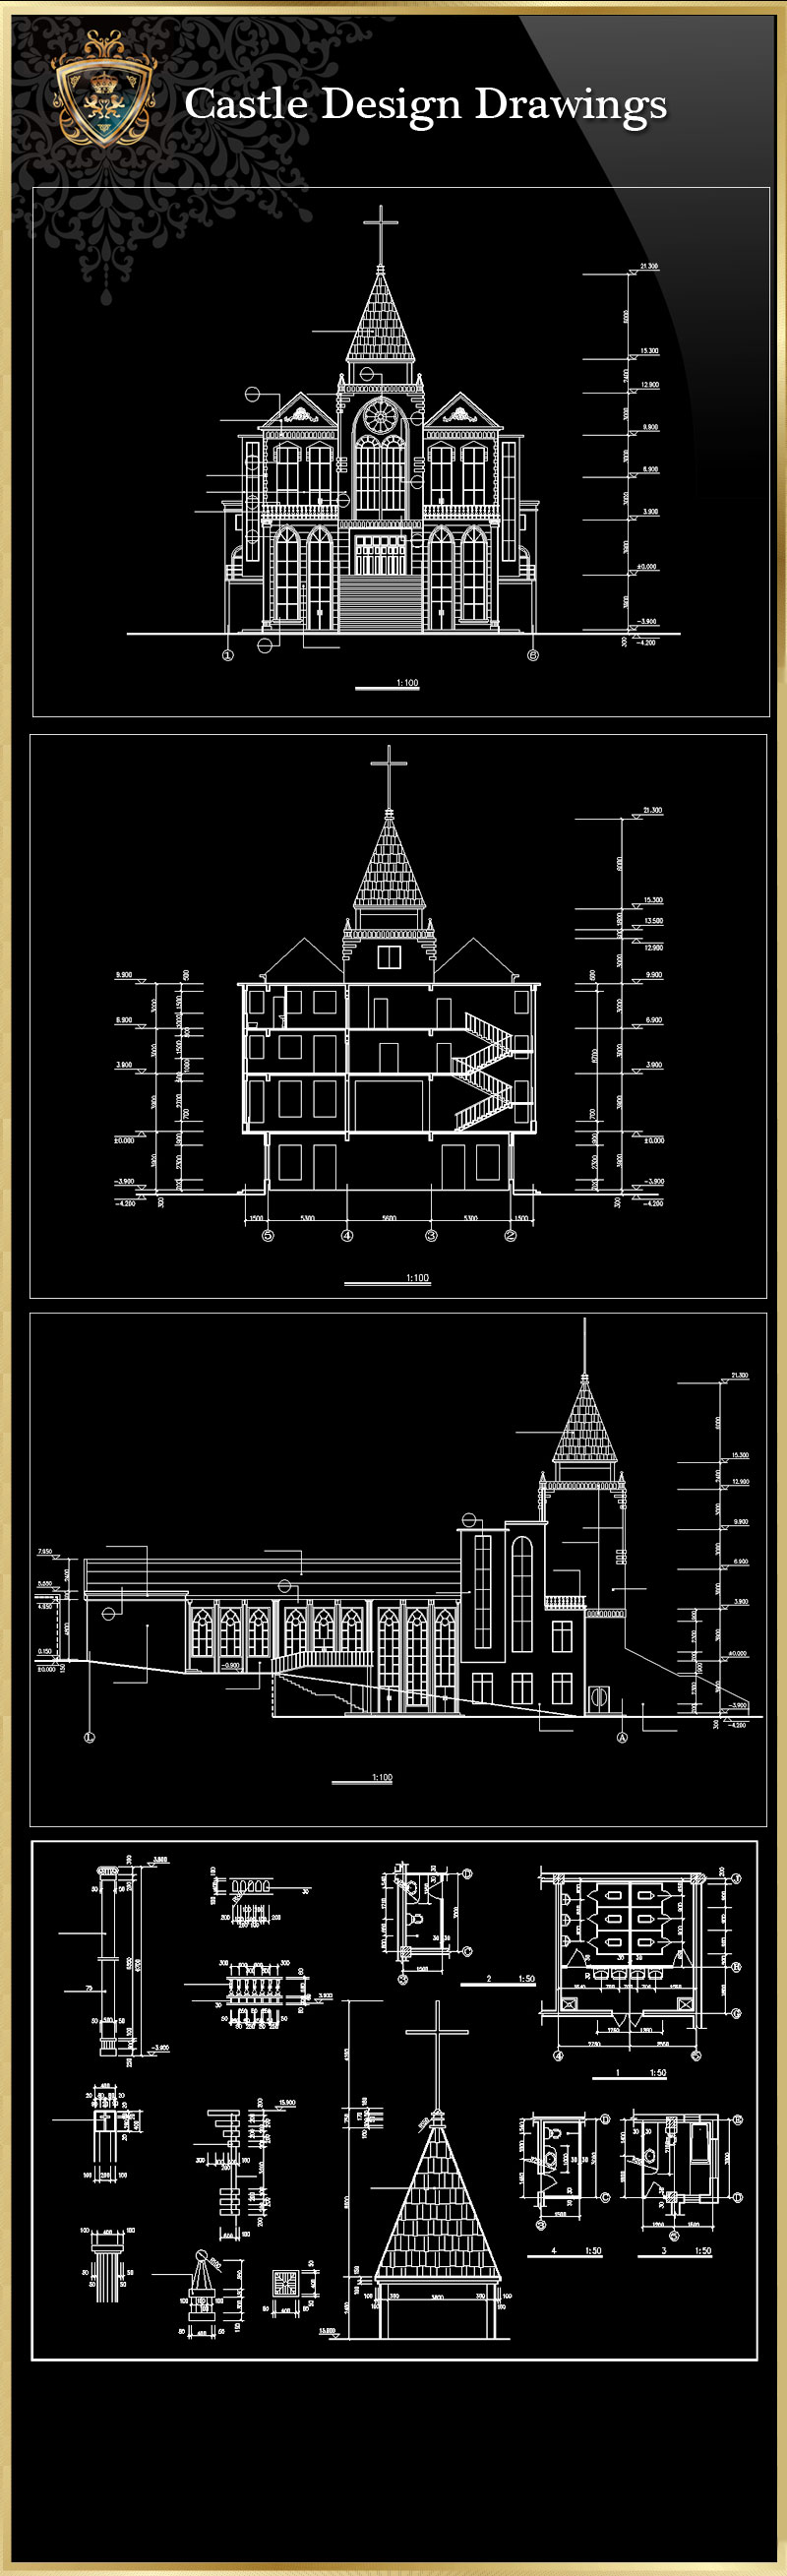 ★【Church Design 1】Download Luxury Architectural Design CAD Drawings--Over 20000+ High quality CAD Blocks and Drawings Download!